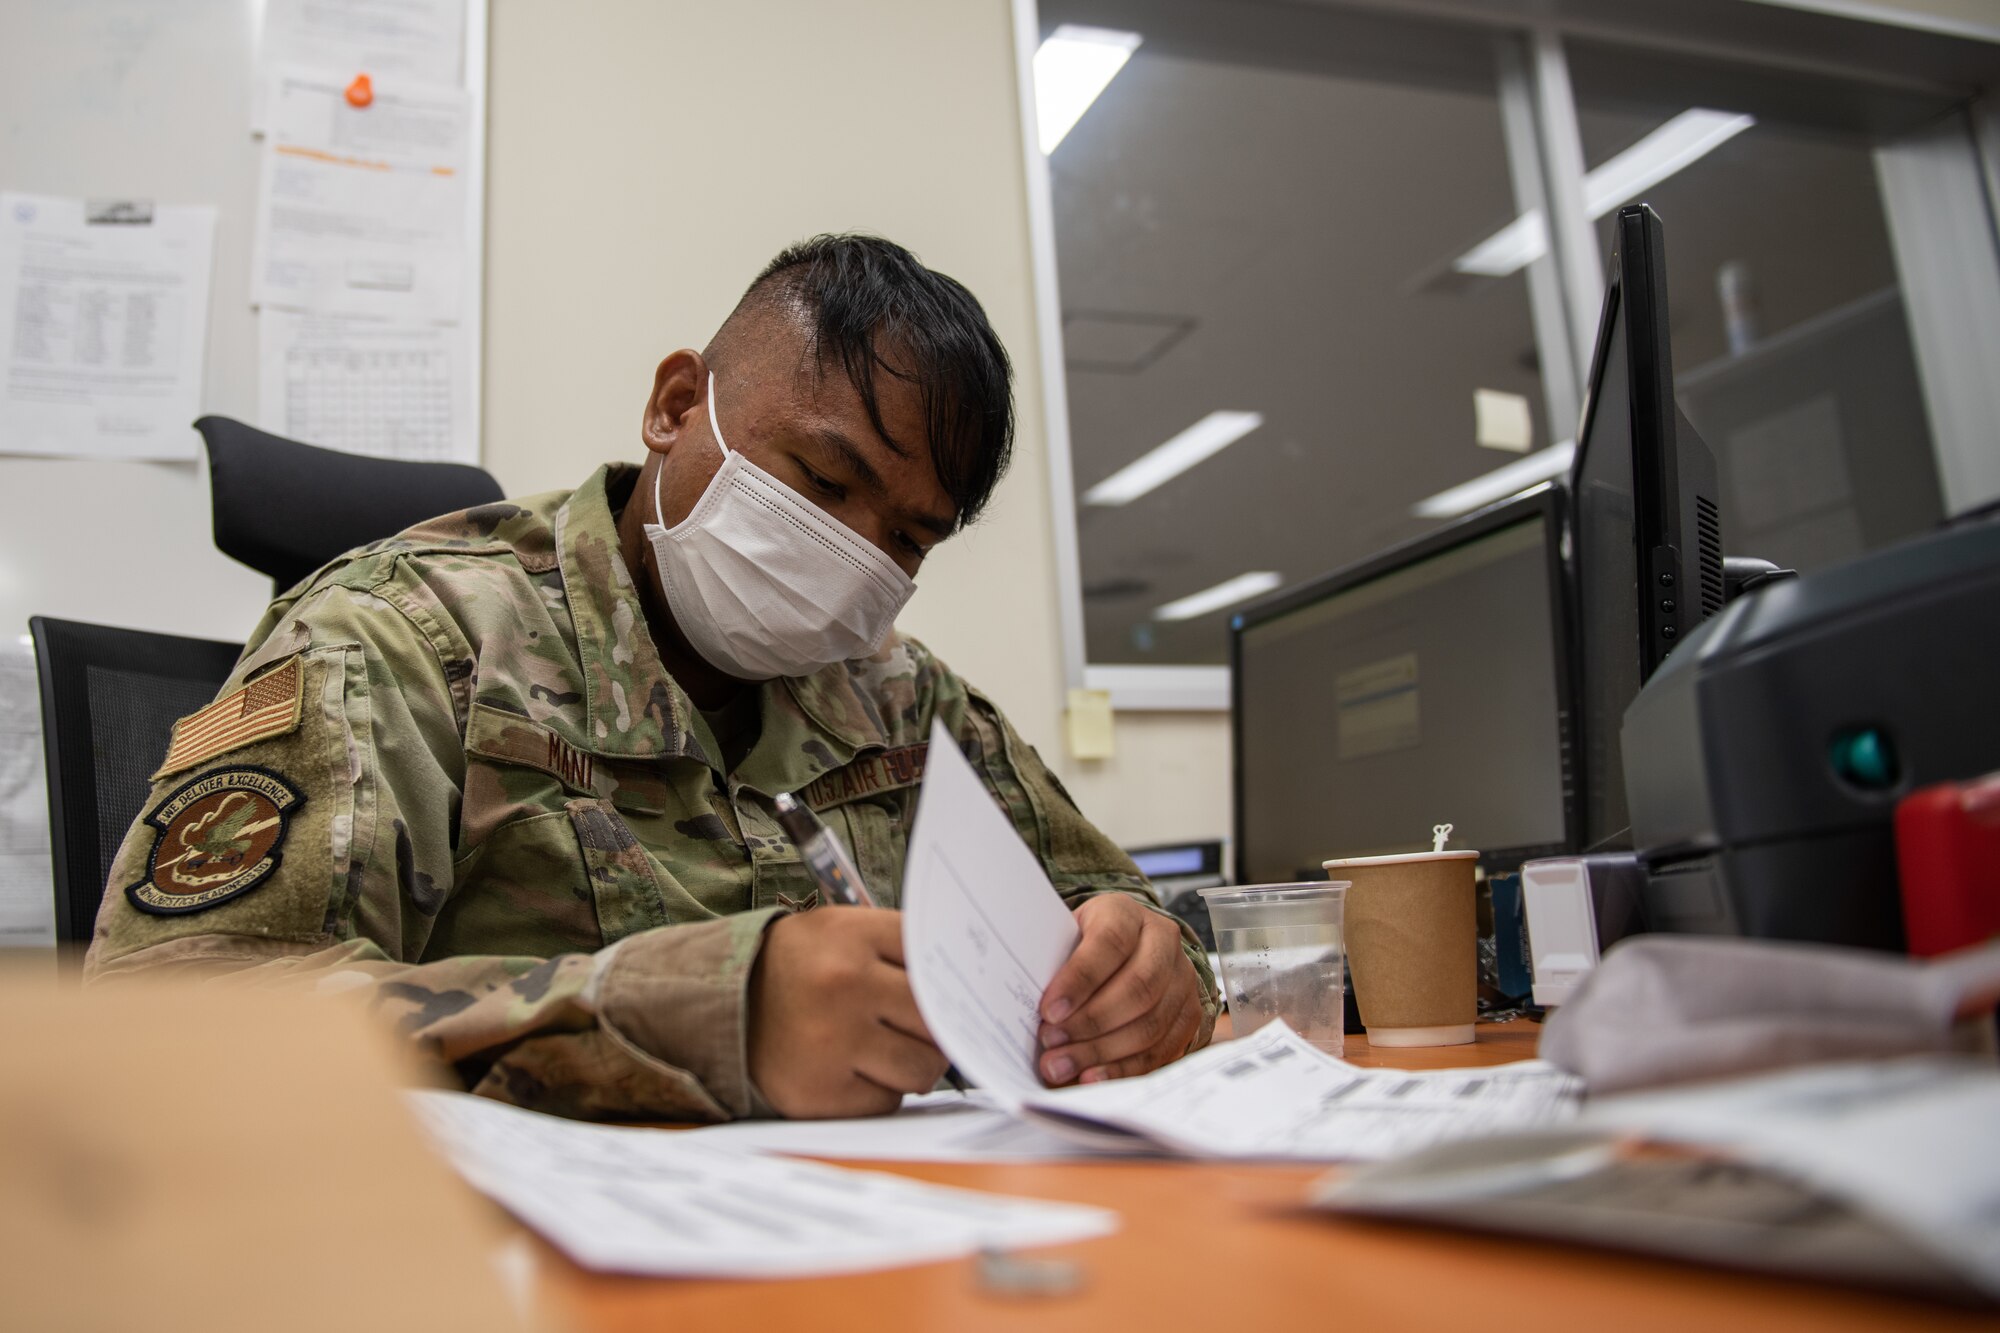 An Airman signs off on papers at his desk